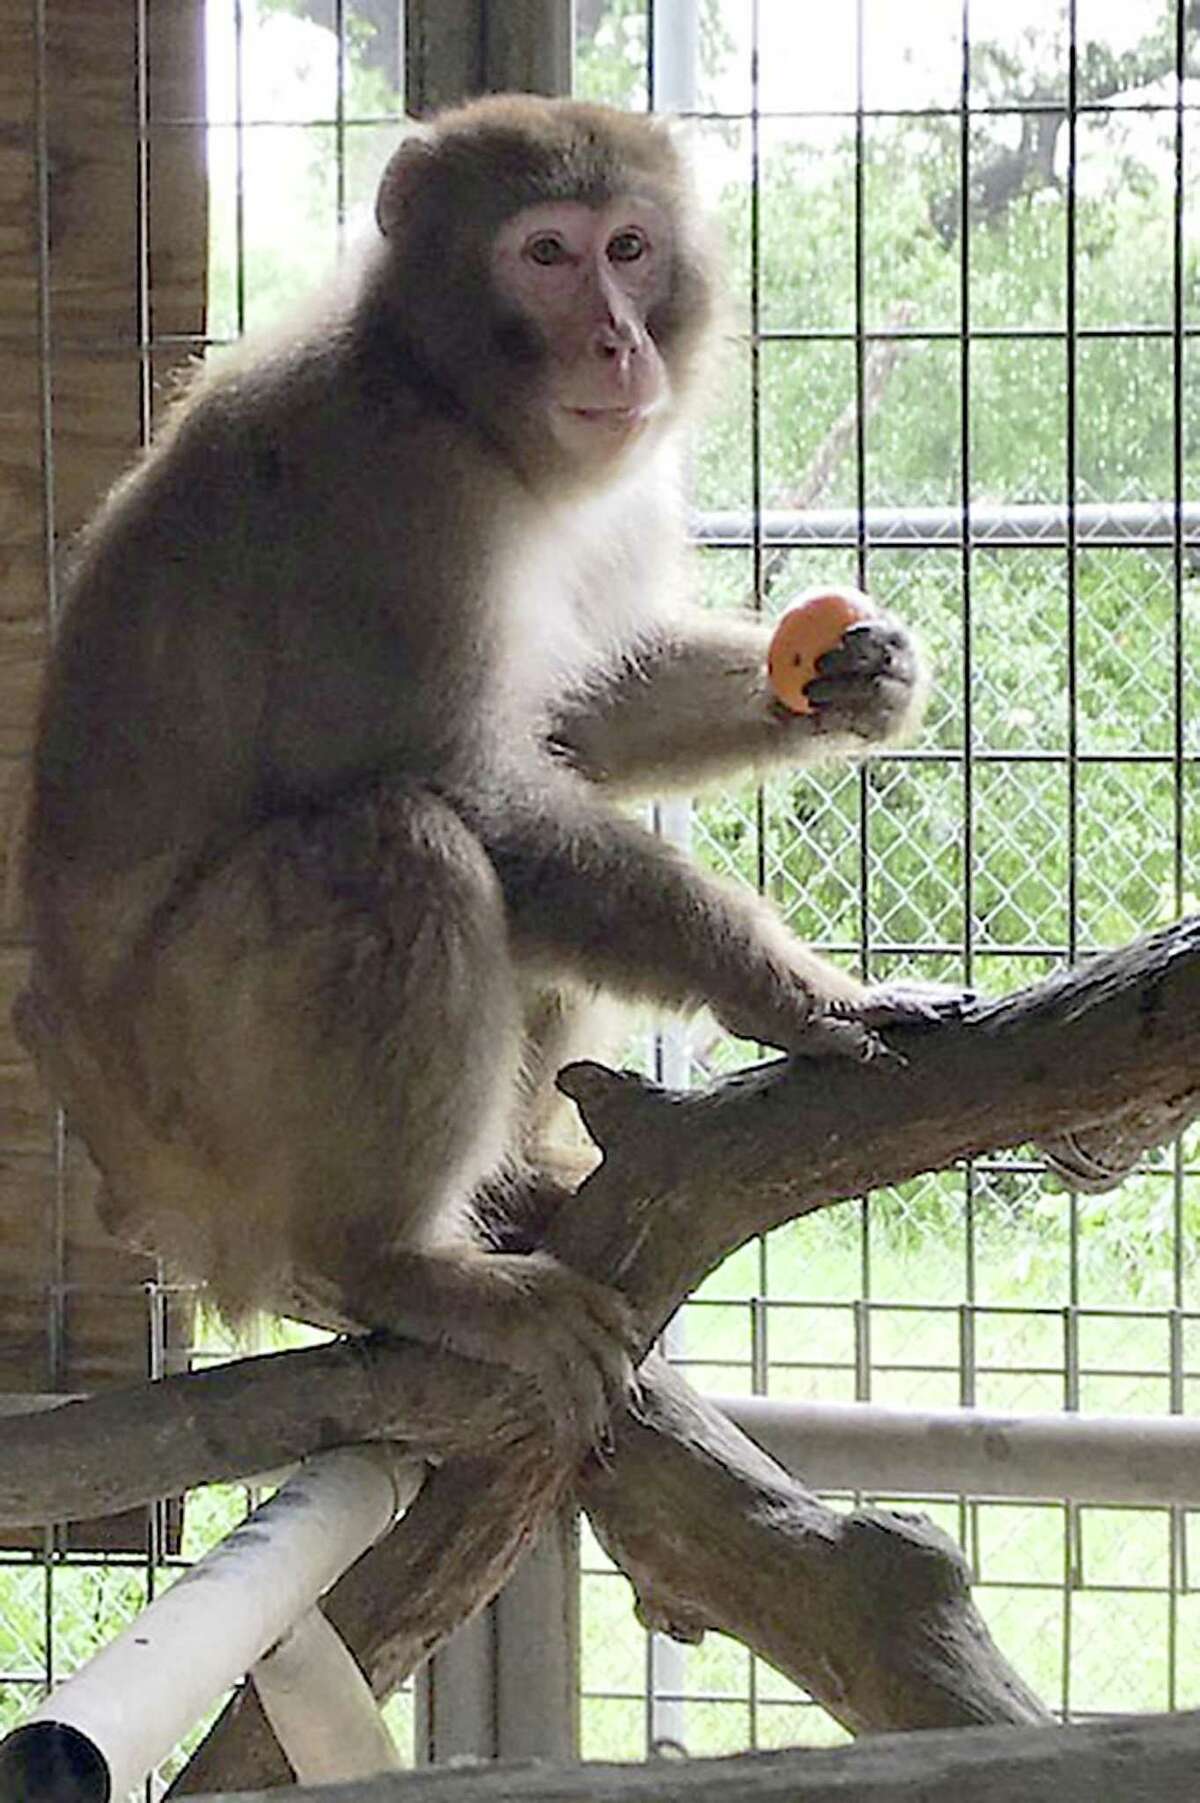 This snow macque relaxes at the Wildlife Rescue & Rehabilitation sanctuary in Kendalia in May 2018. The monkey had been kept in a Rio Grande Valley home but faced euthanasia after a child was bitten. He was saved after a storm of social media protest raised awareness of his situation and the wildlife organization took him in.